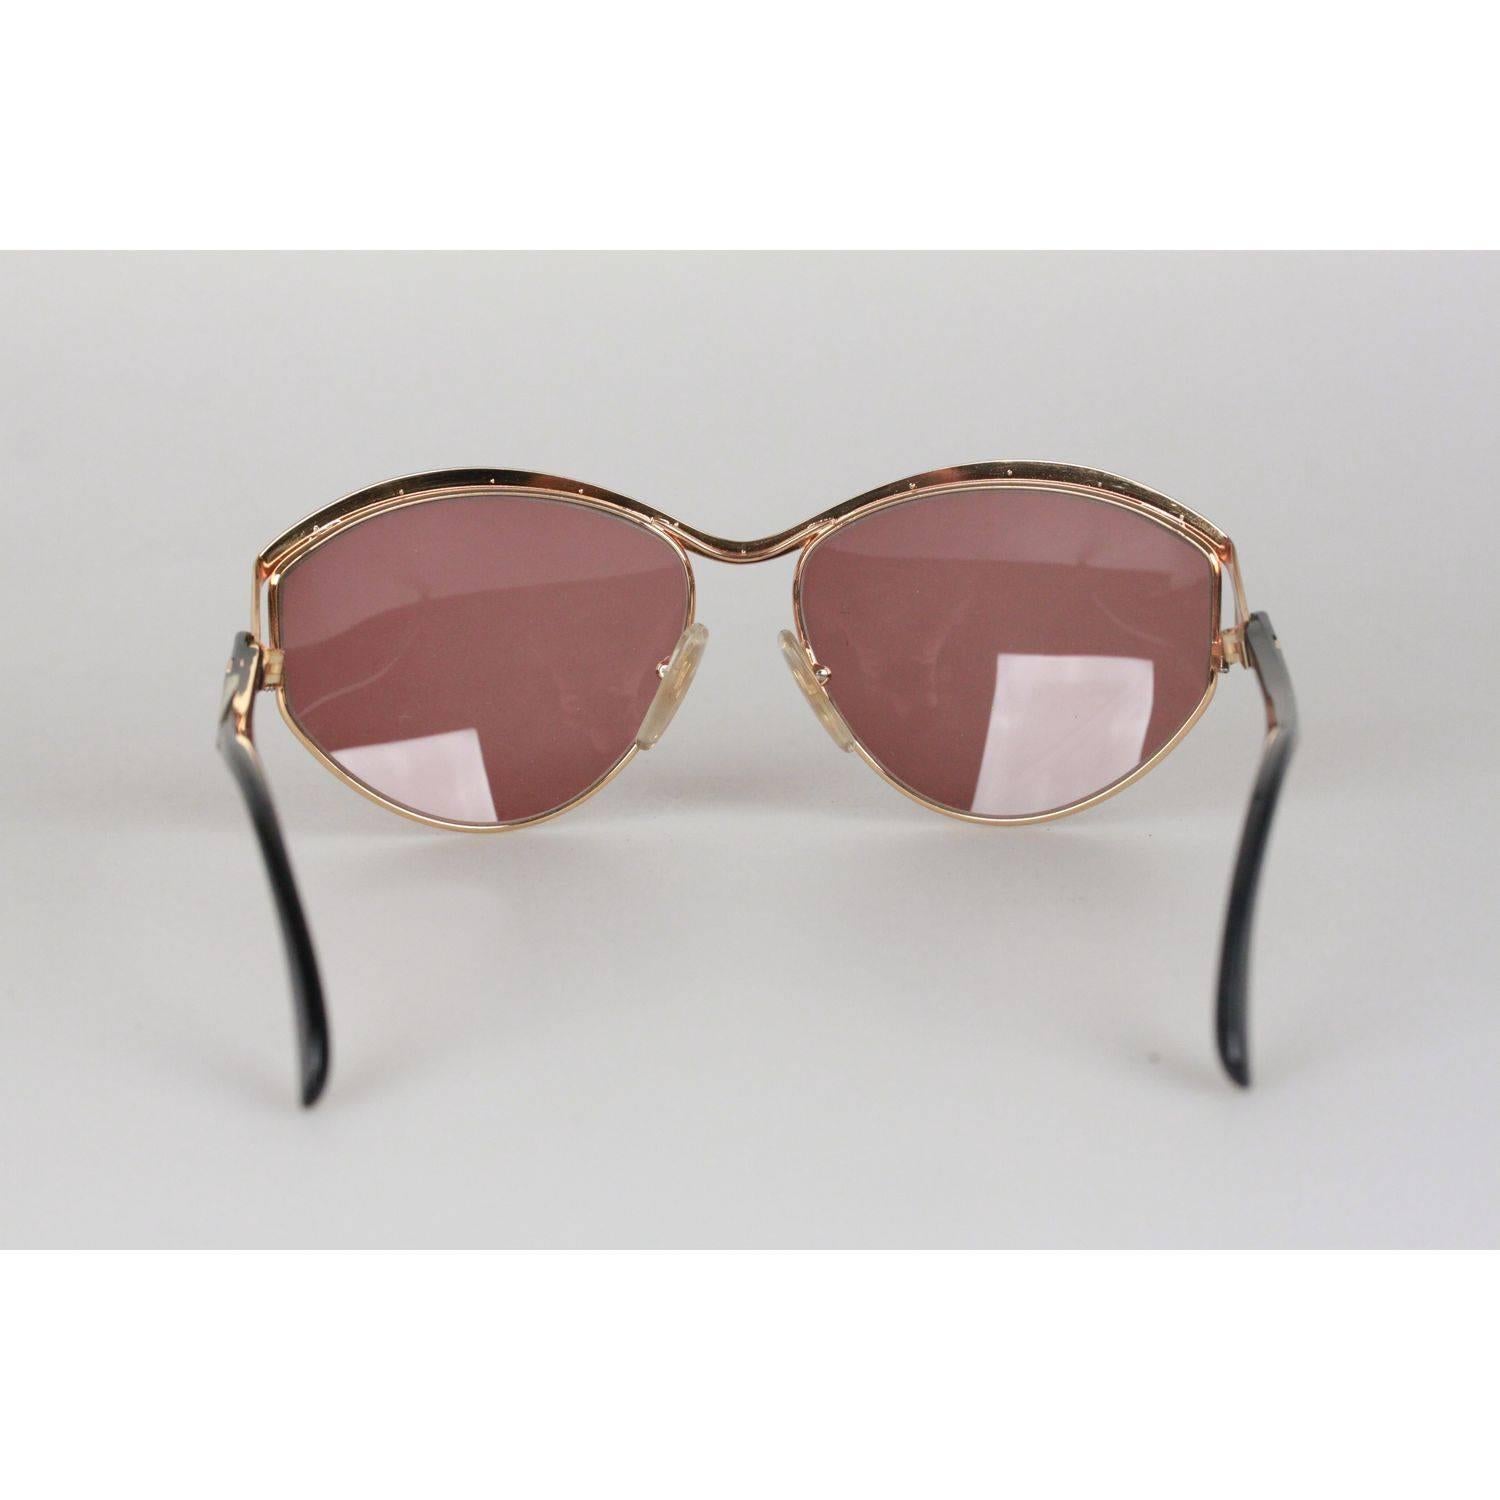 TED LAPIDUS Vintage Gold OVERSIZED Sunglasses with Rhinestones TL 3301 NOS 3